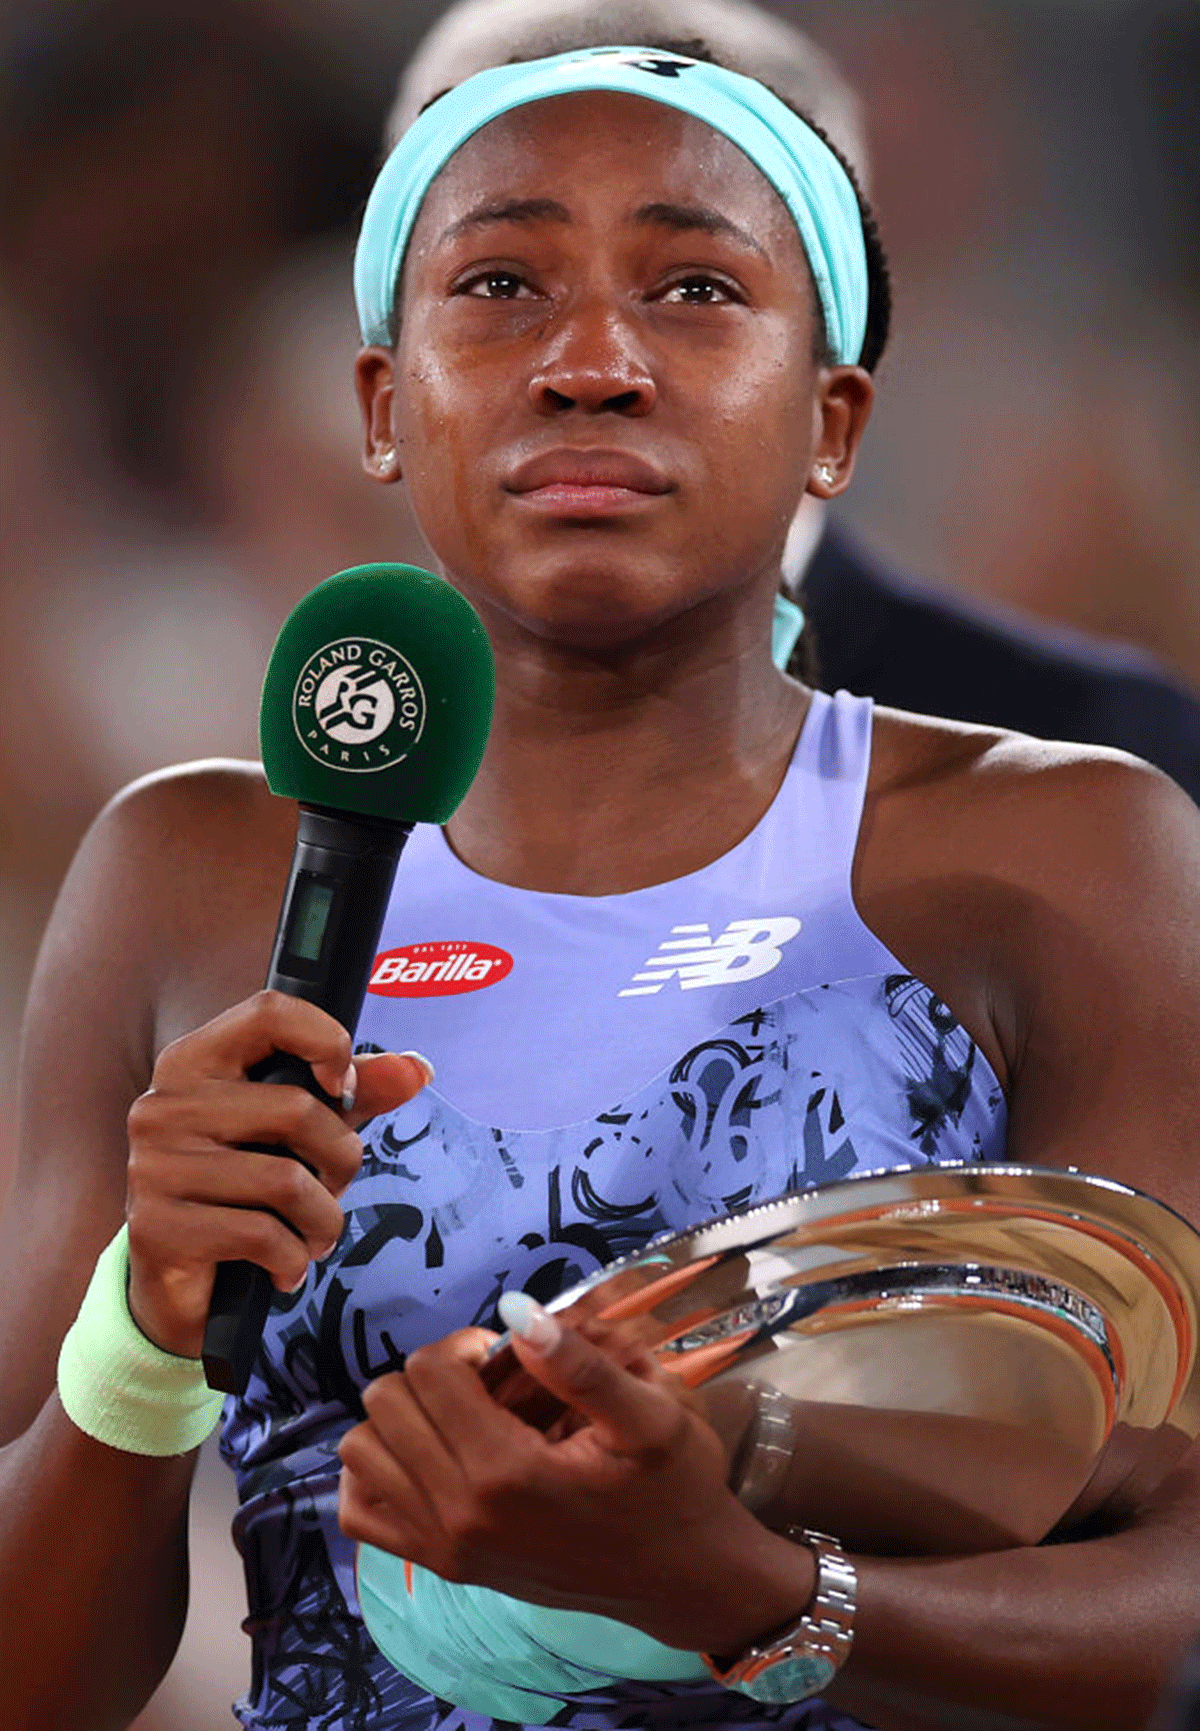 Coco Gauff was in tears during the presentation ceremony after the women's French Open final on Saturday